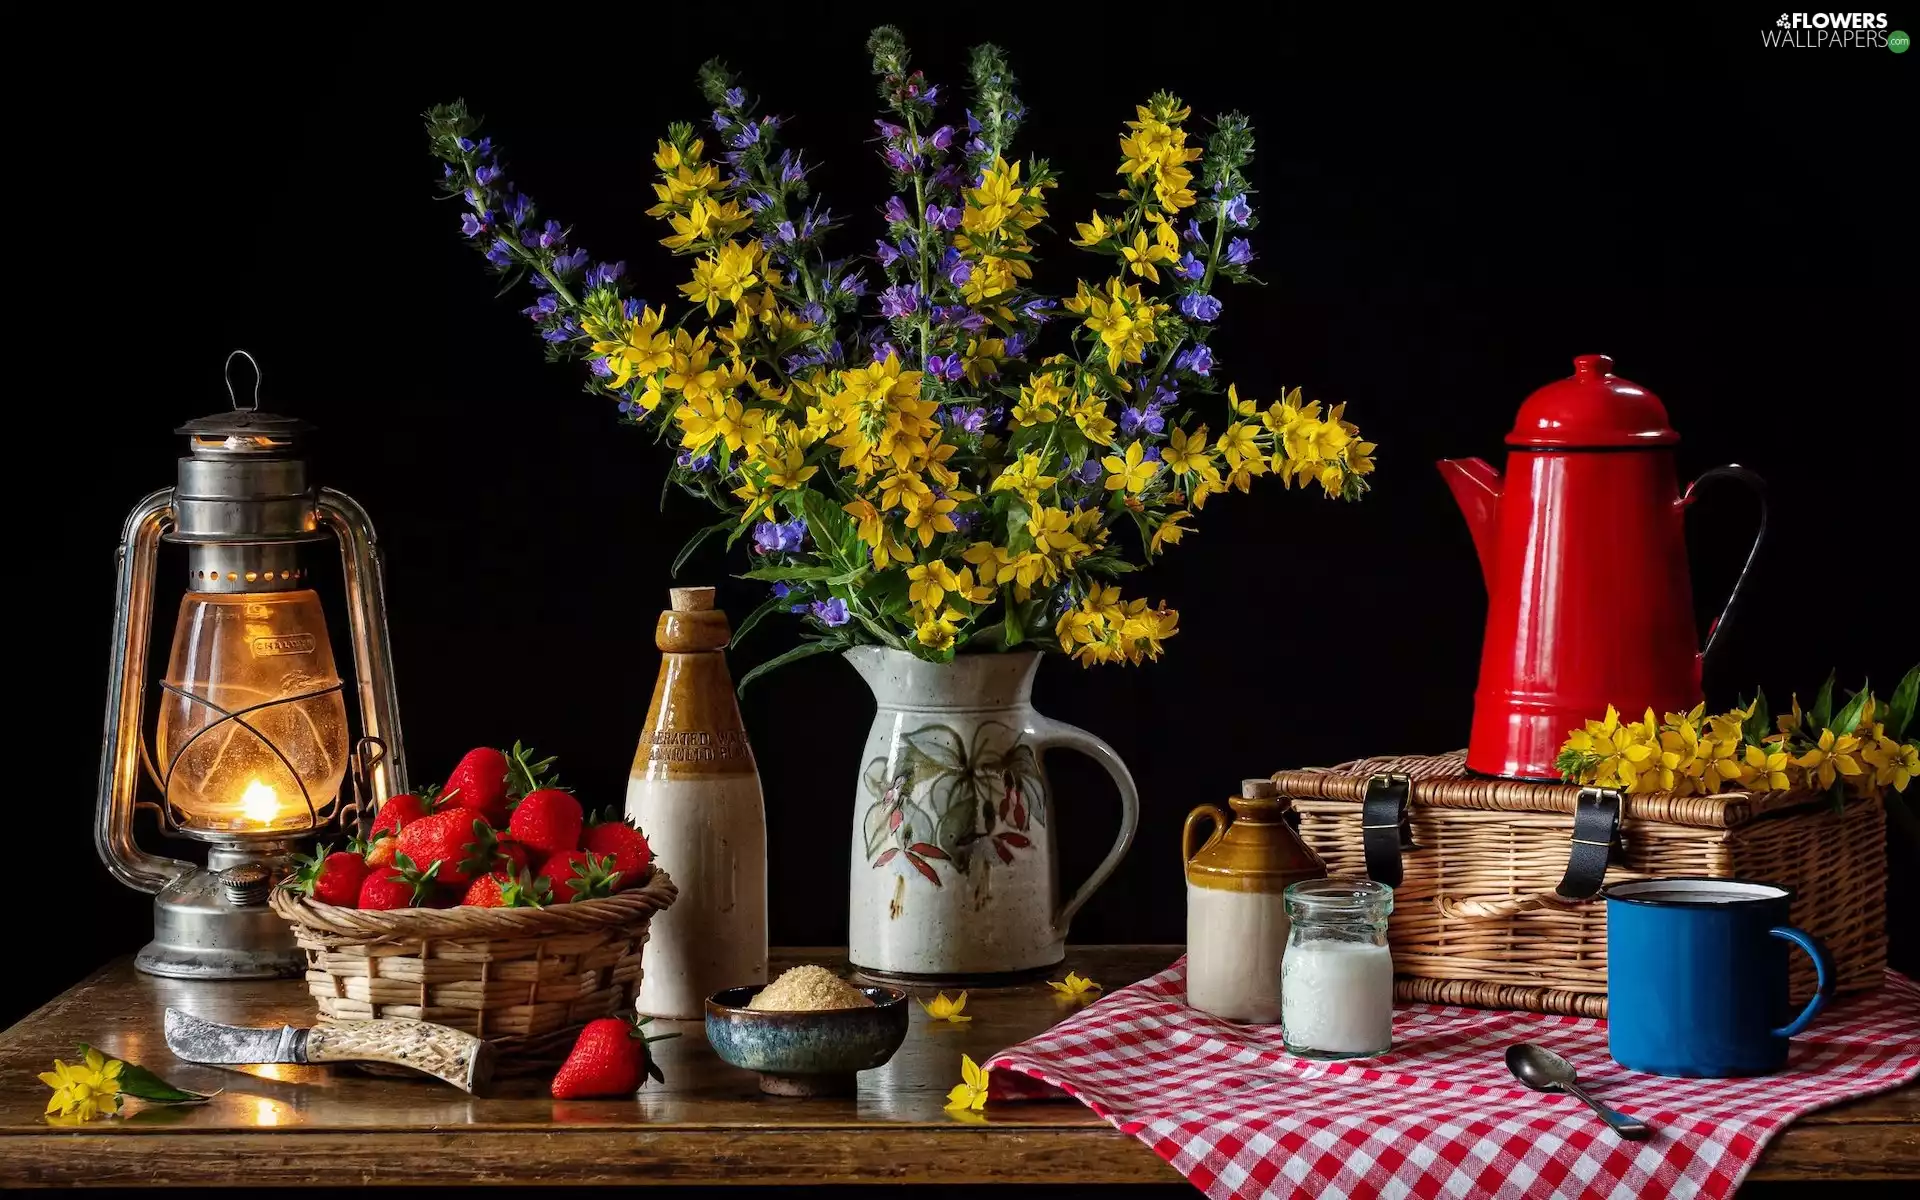 jug, Bouquet of Flowers, Cup, Lamp, composition, strawberries, napkin